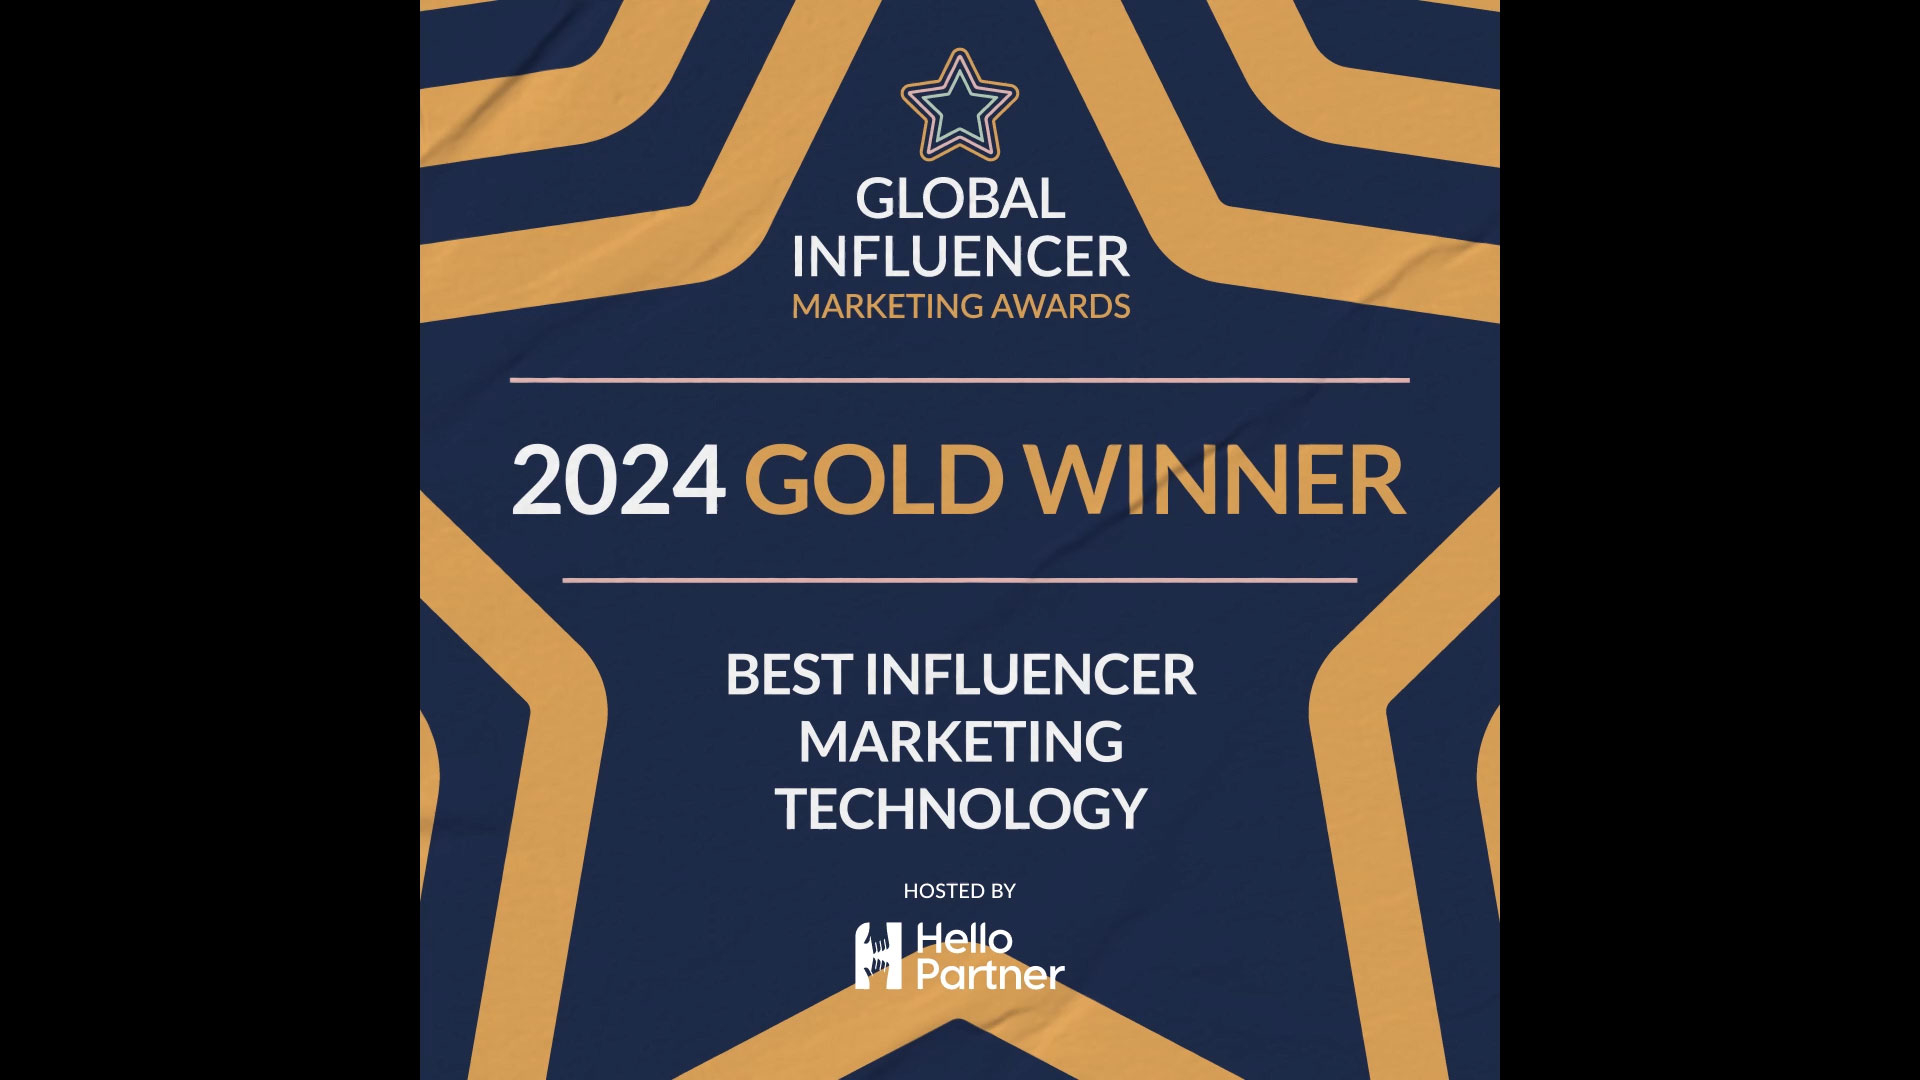 URLgenius was honored with the Best Marketing Influencer Technology award at the 2024 Global Influencer Marketing Awards.